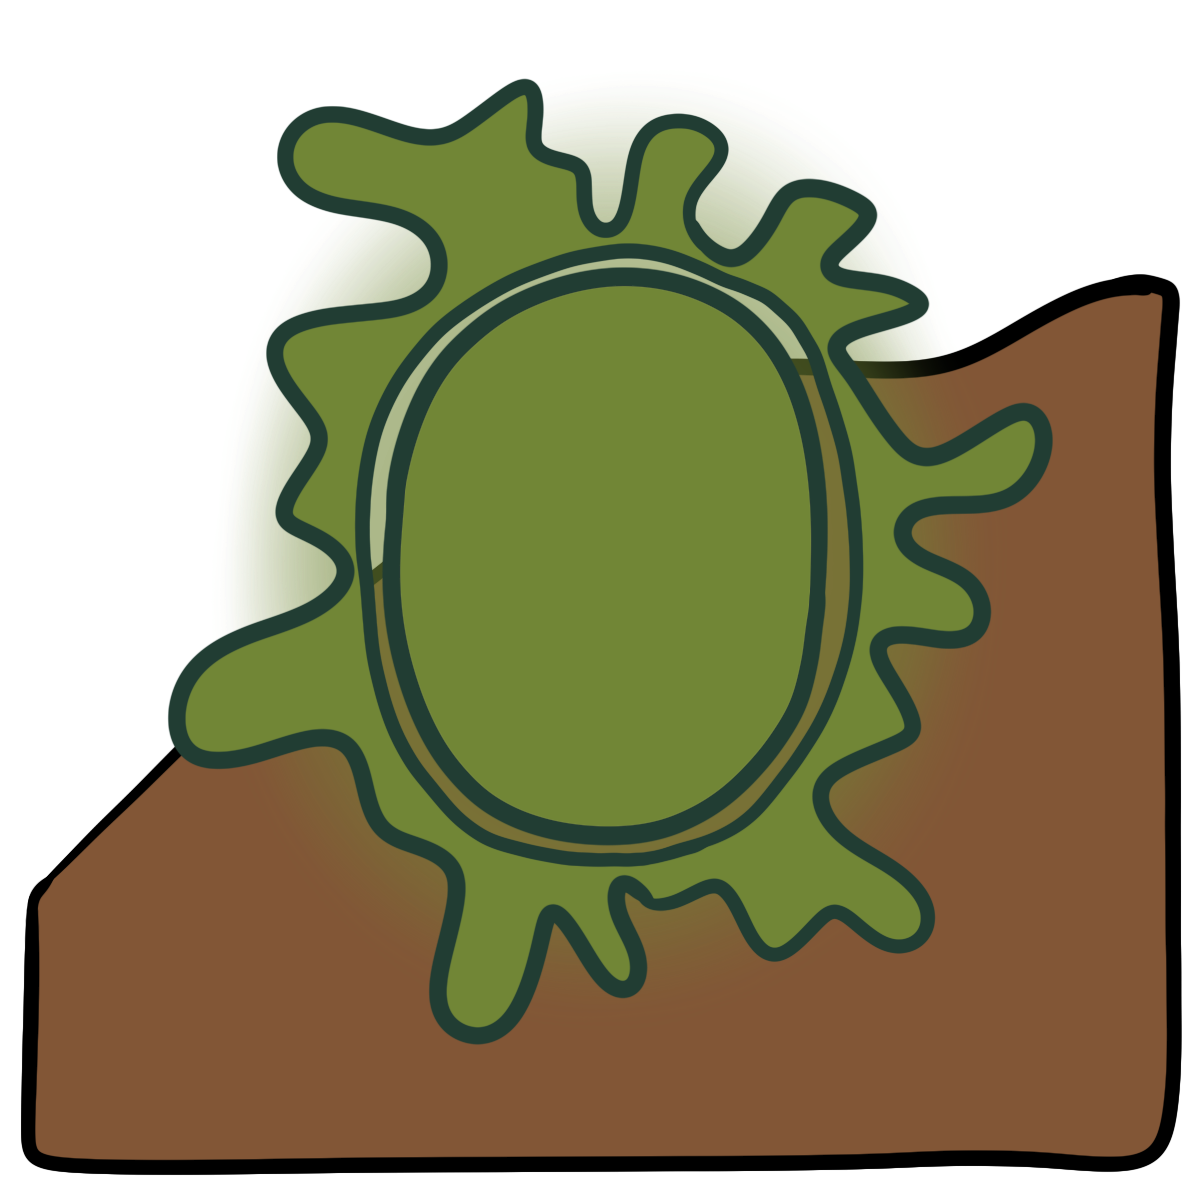 A yellowy green oval with a splatting blob shape encircling it. Curved medium brown skin fills the bottom half of the background.